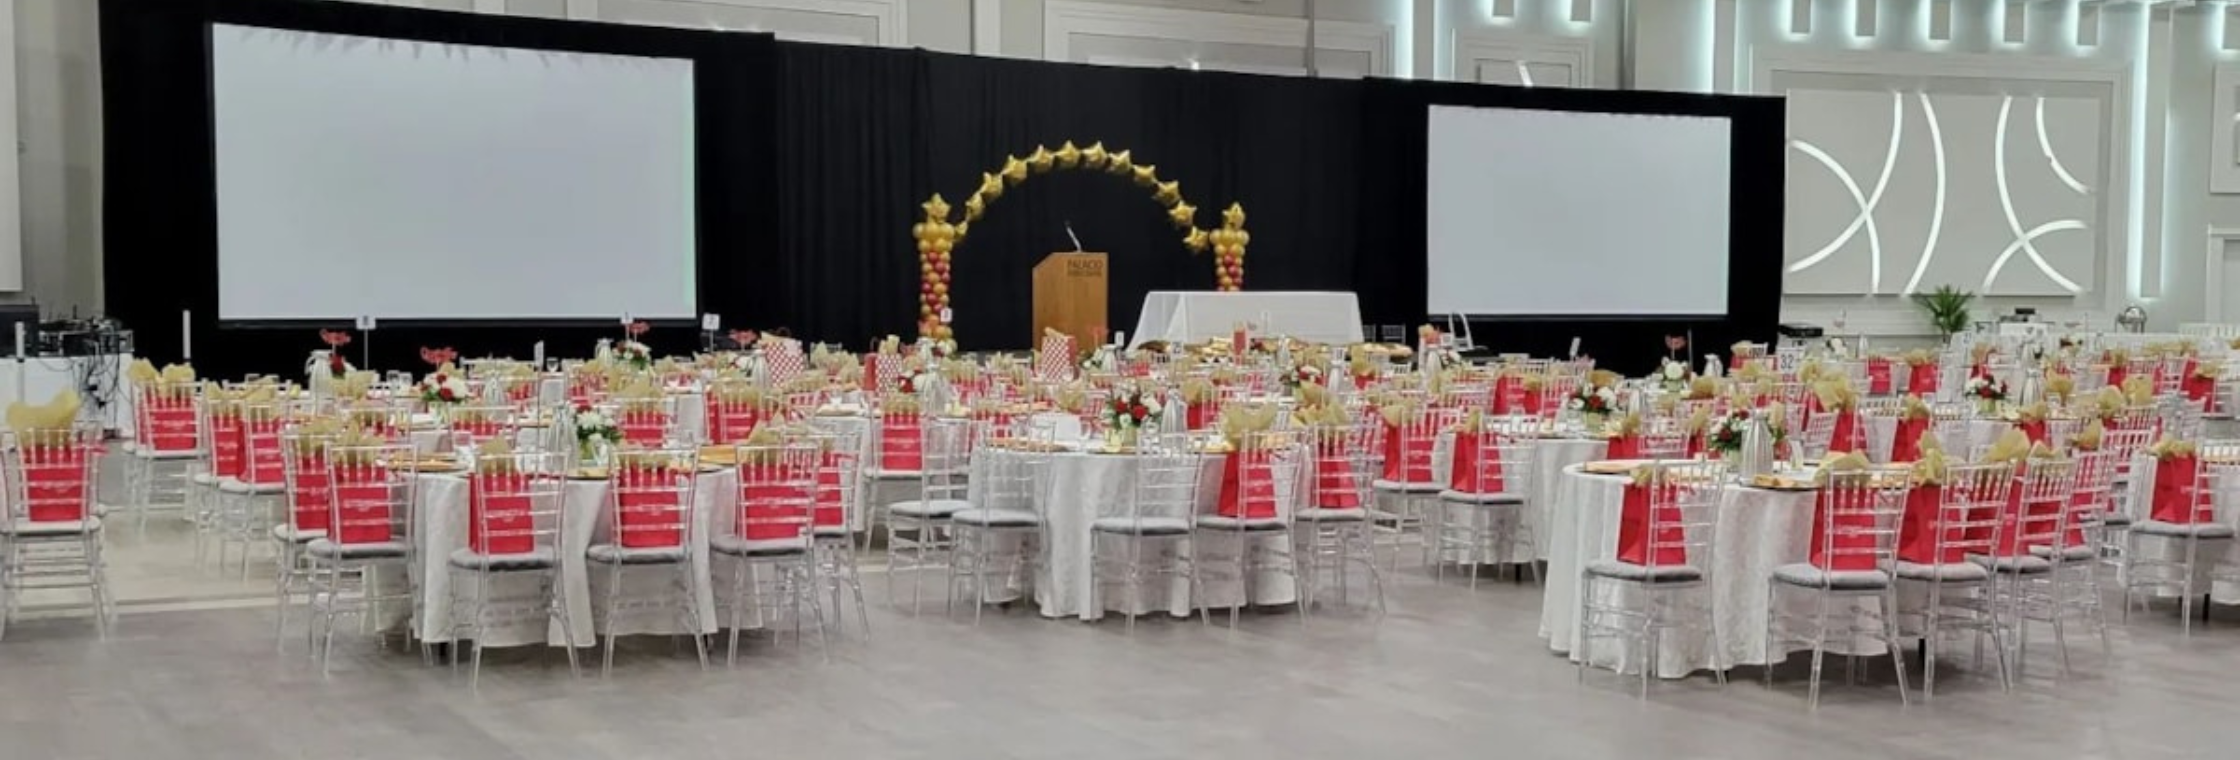 The Art of Event Planning at Palacio Event Centre